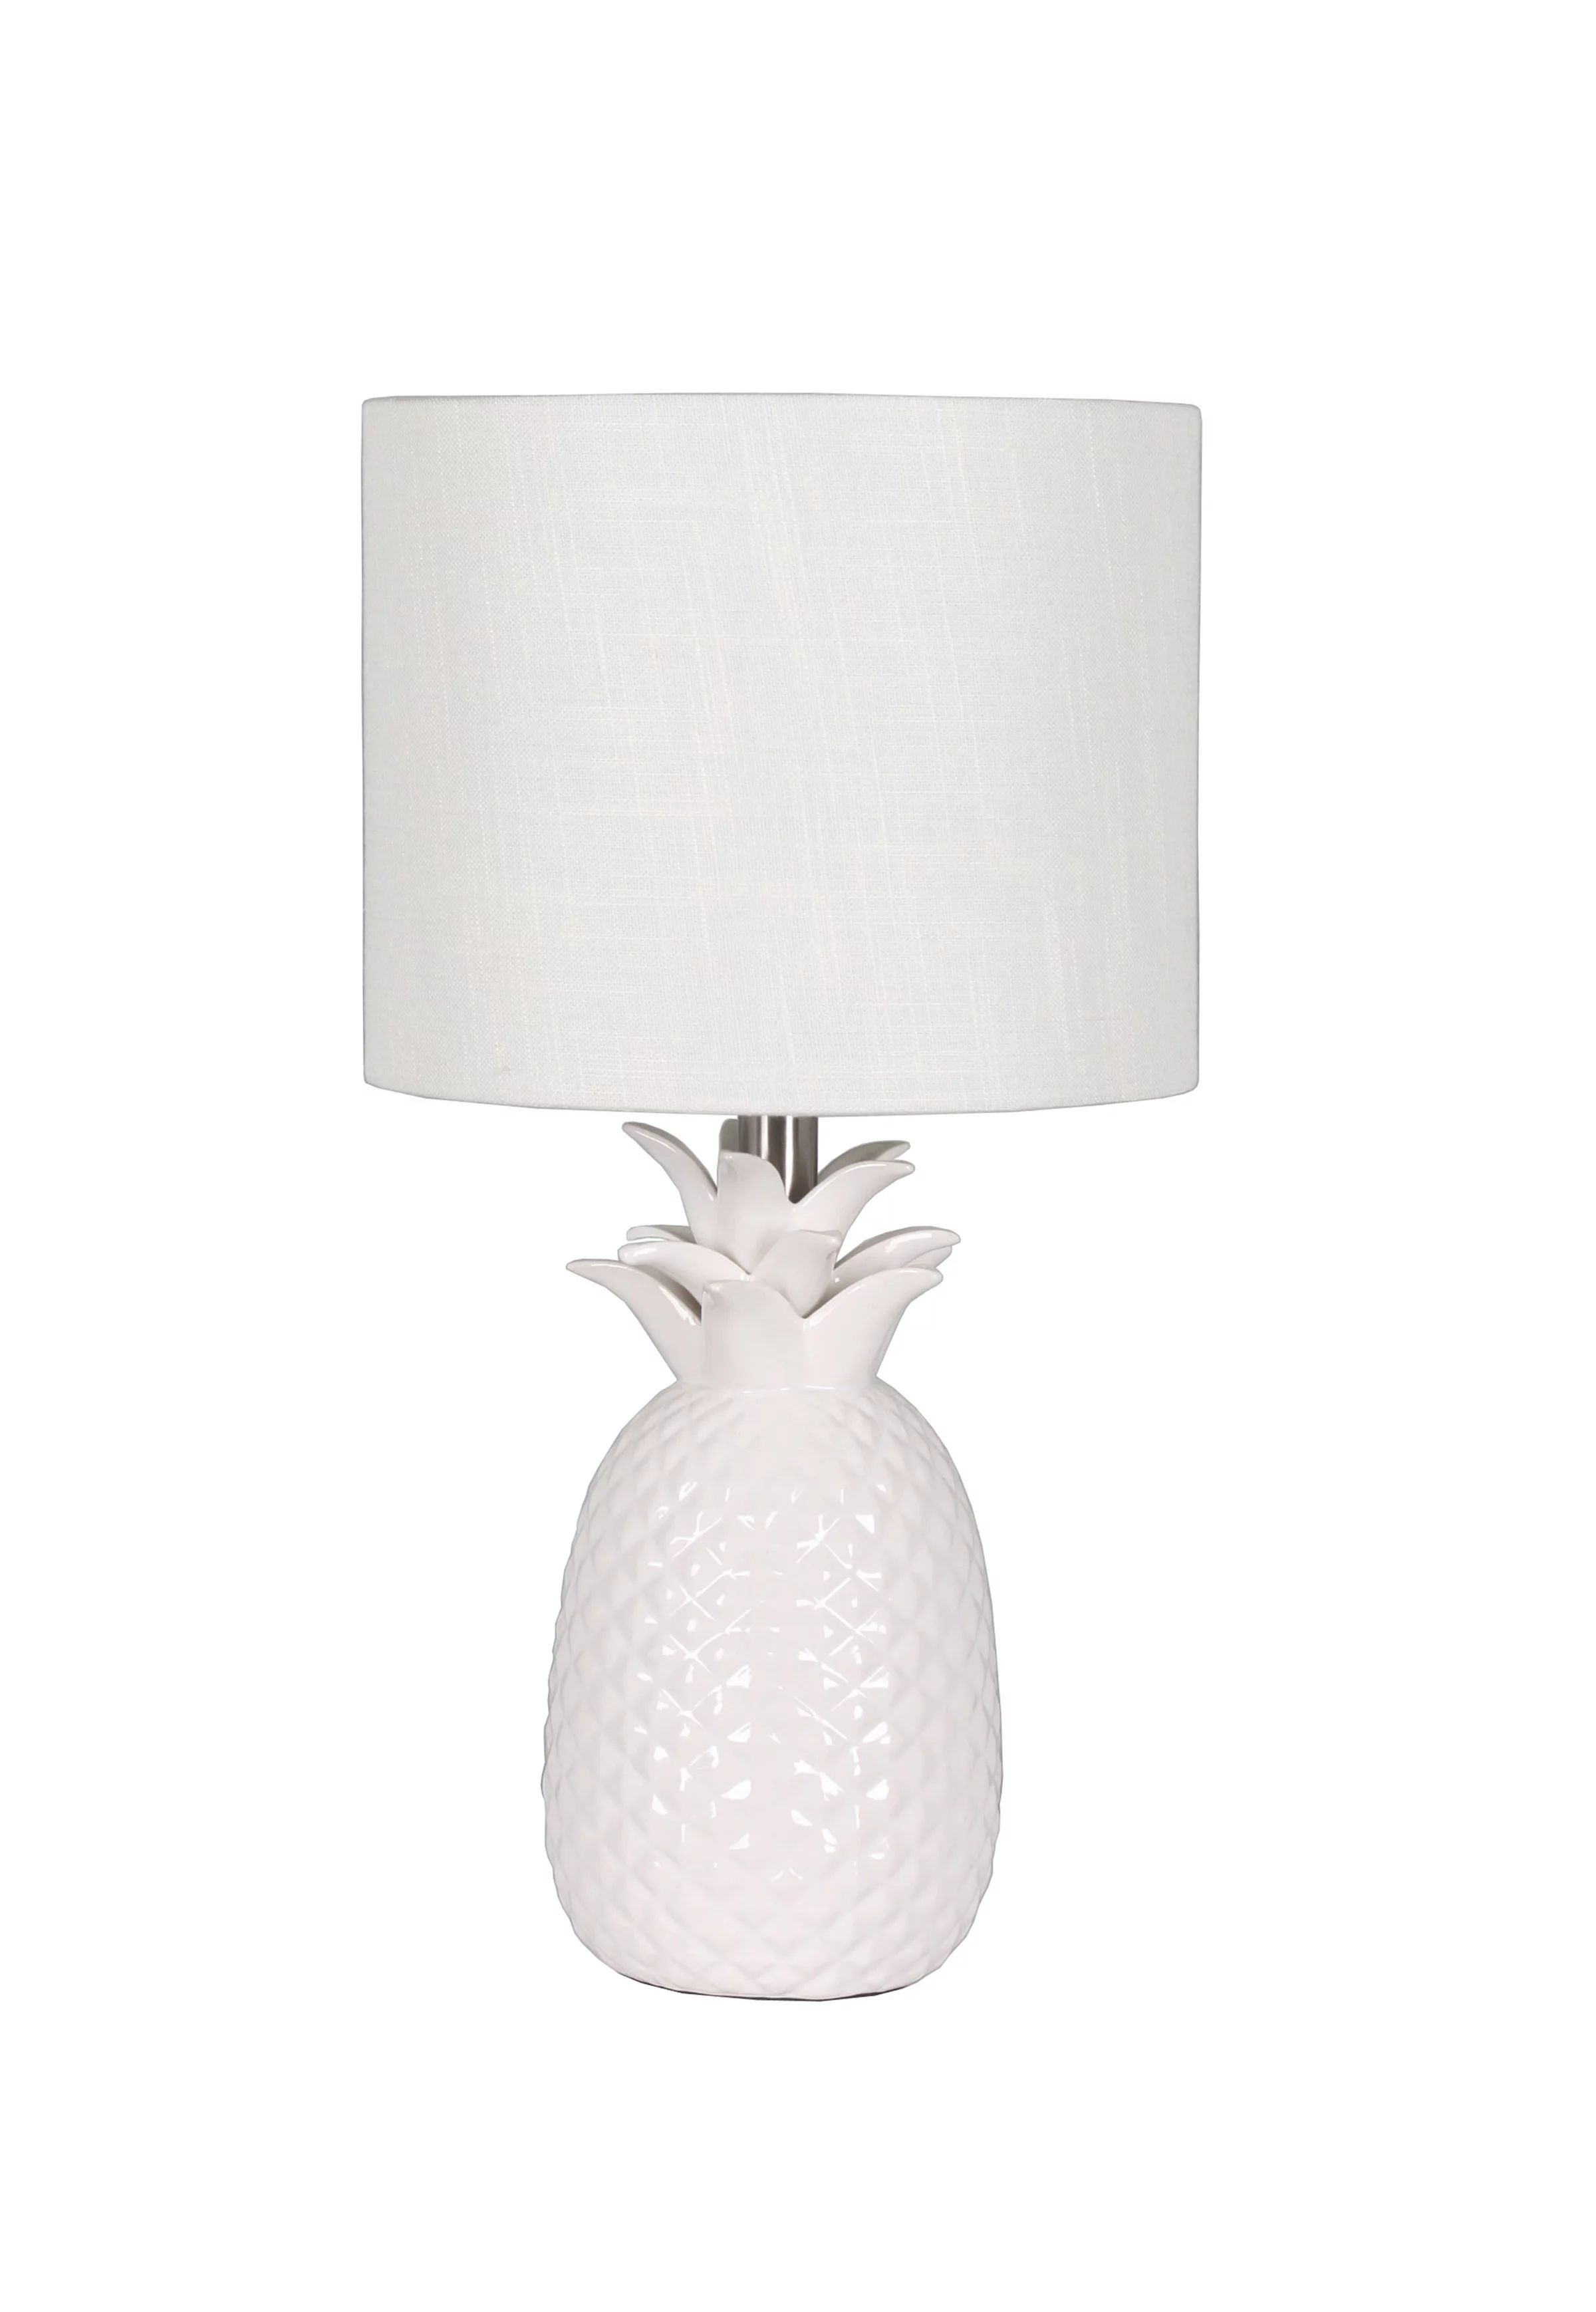 Simplee Adesso Pineapple Table Lamp, White | Walmart (US)